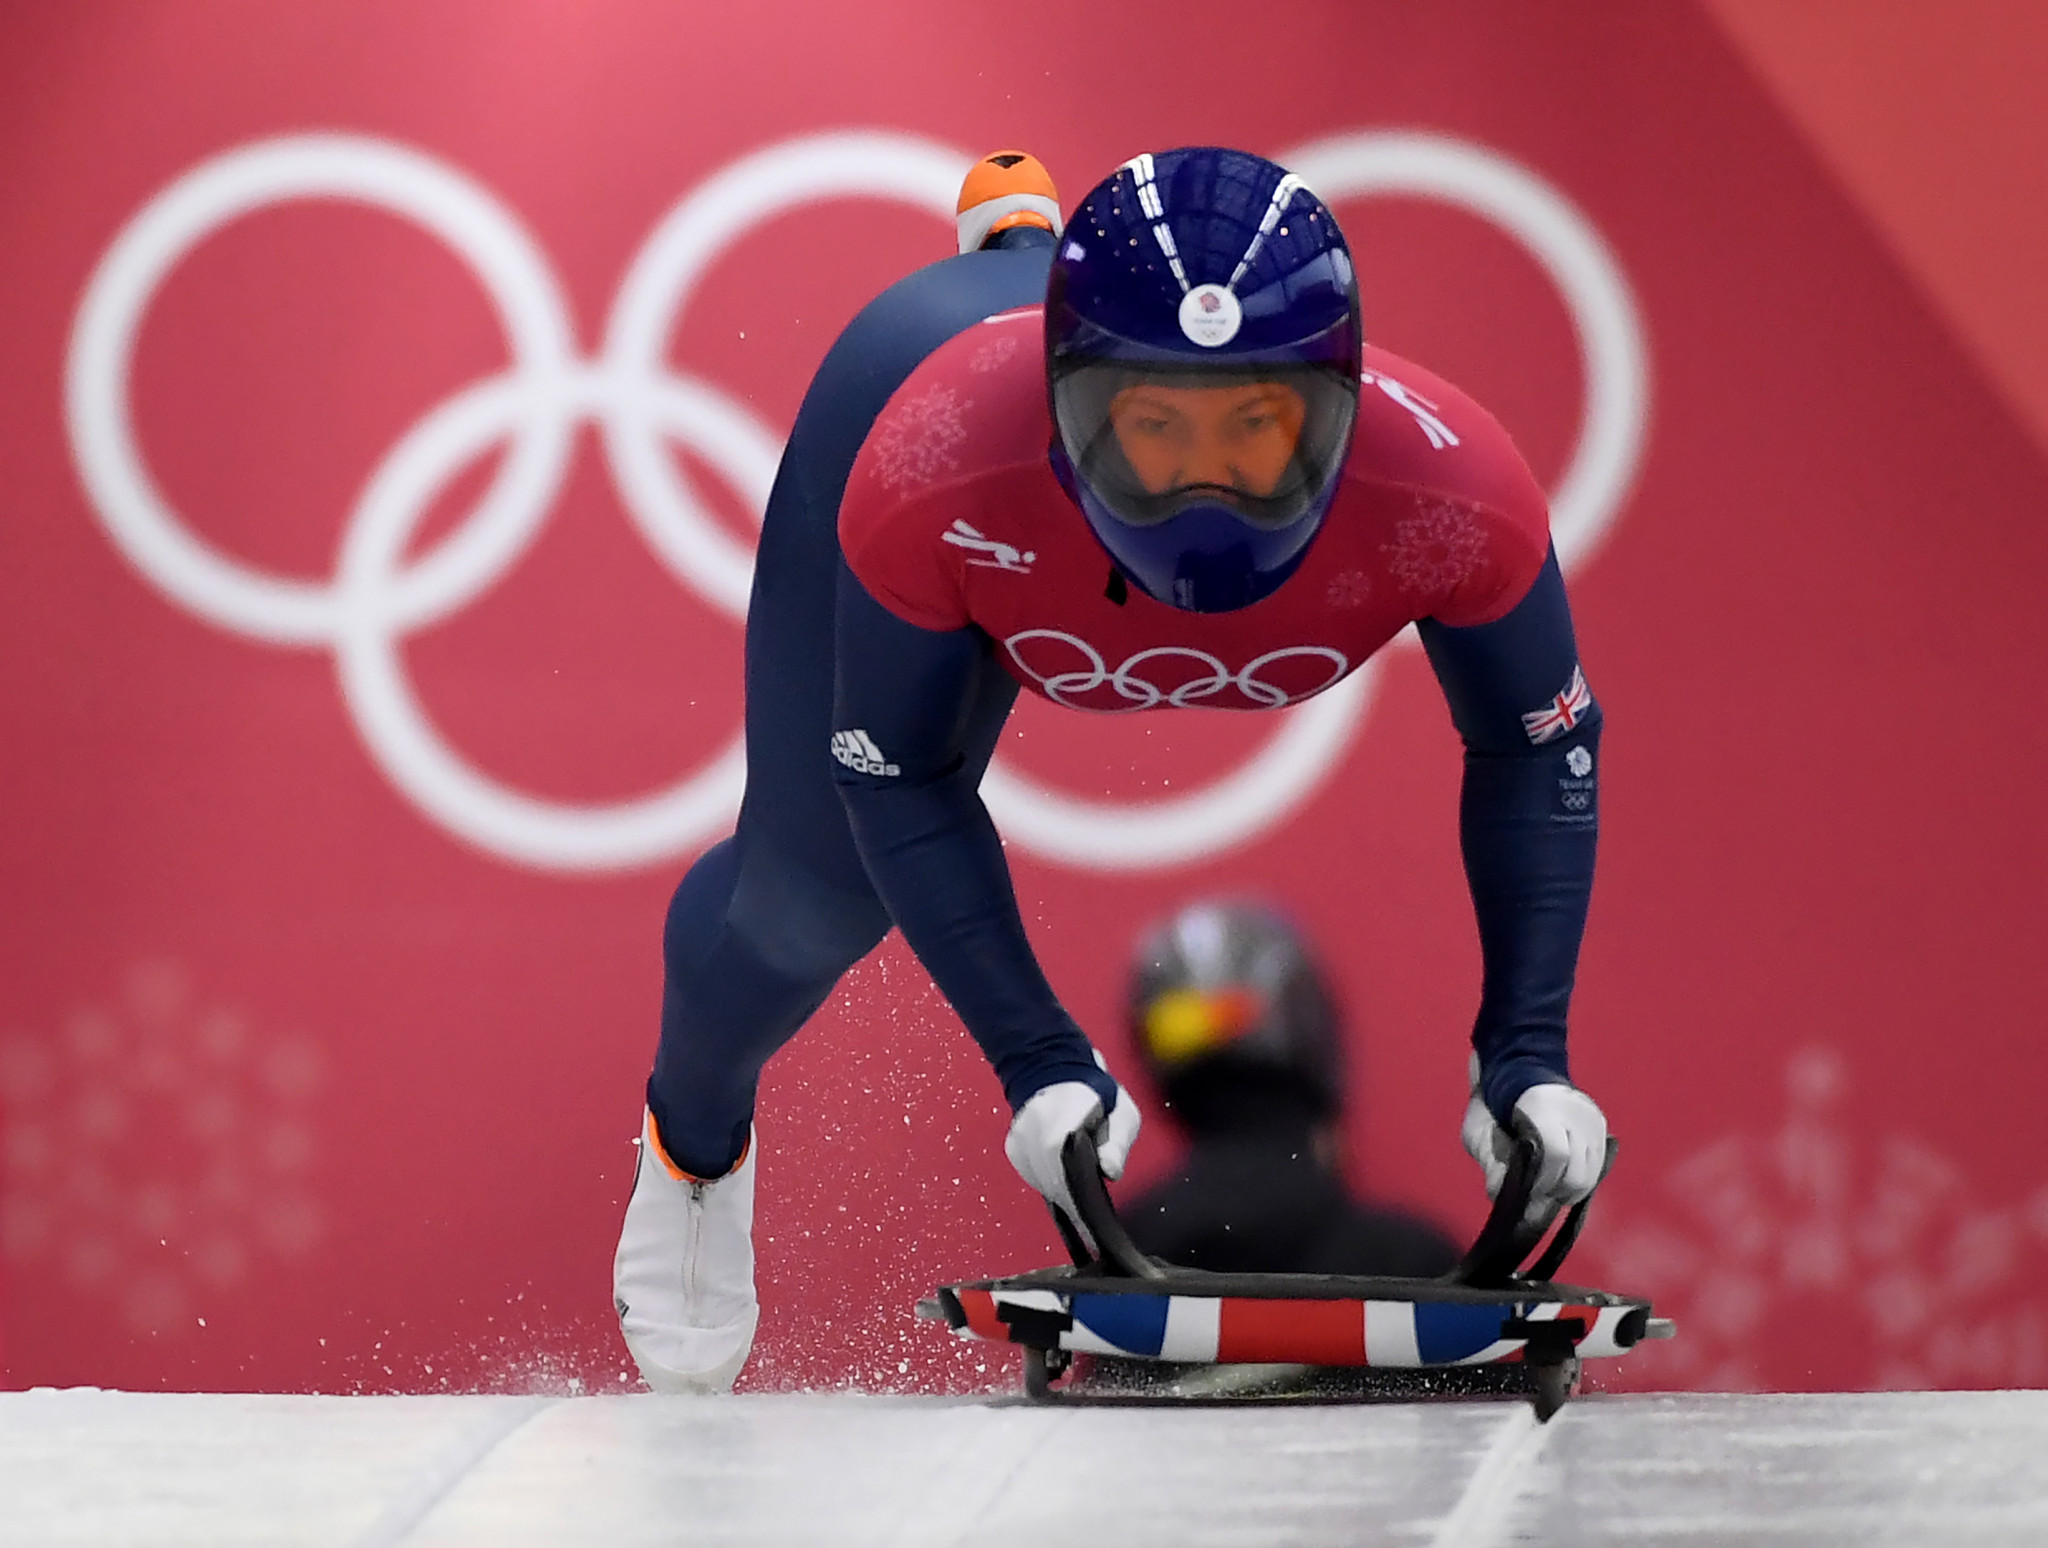 Britain's Lizzy Yarnold is among those to have threatened to snub members of the OAR team ©Getty Images